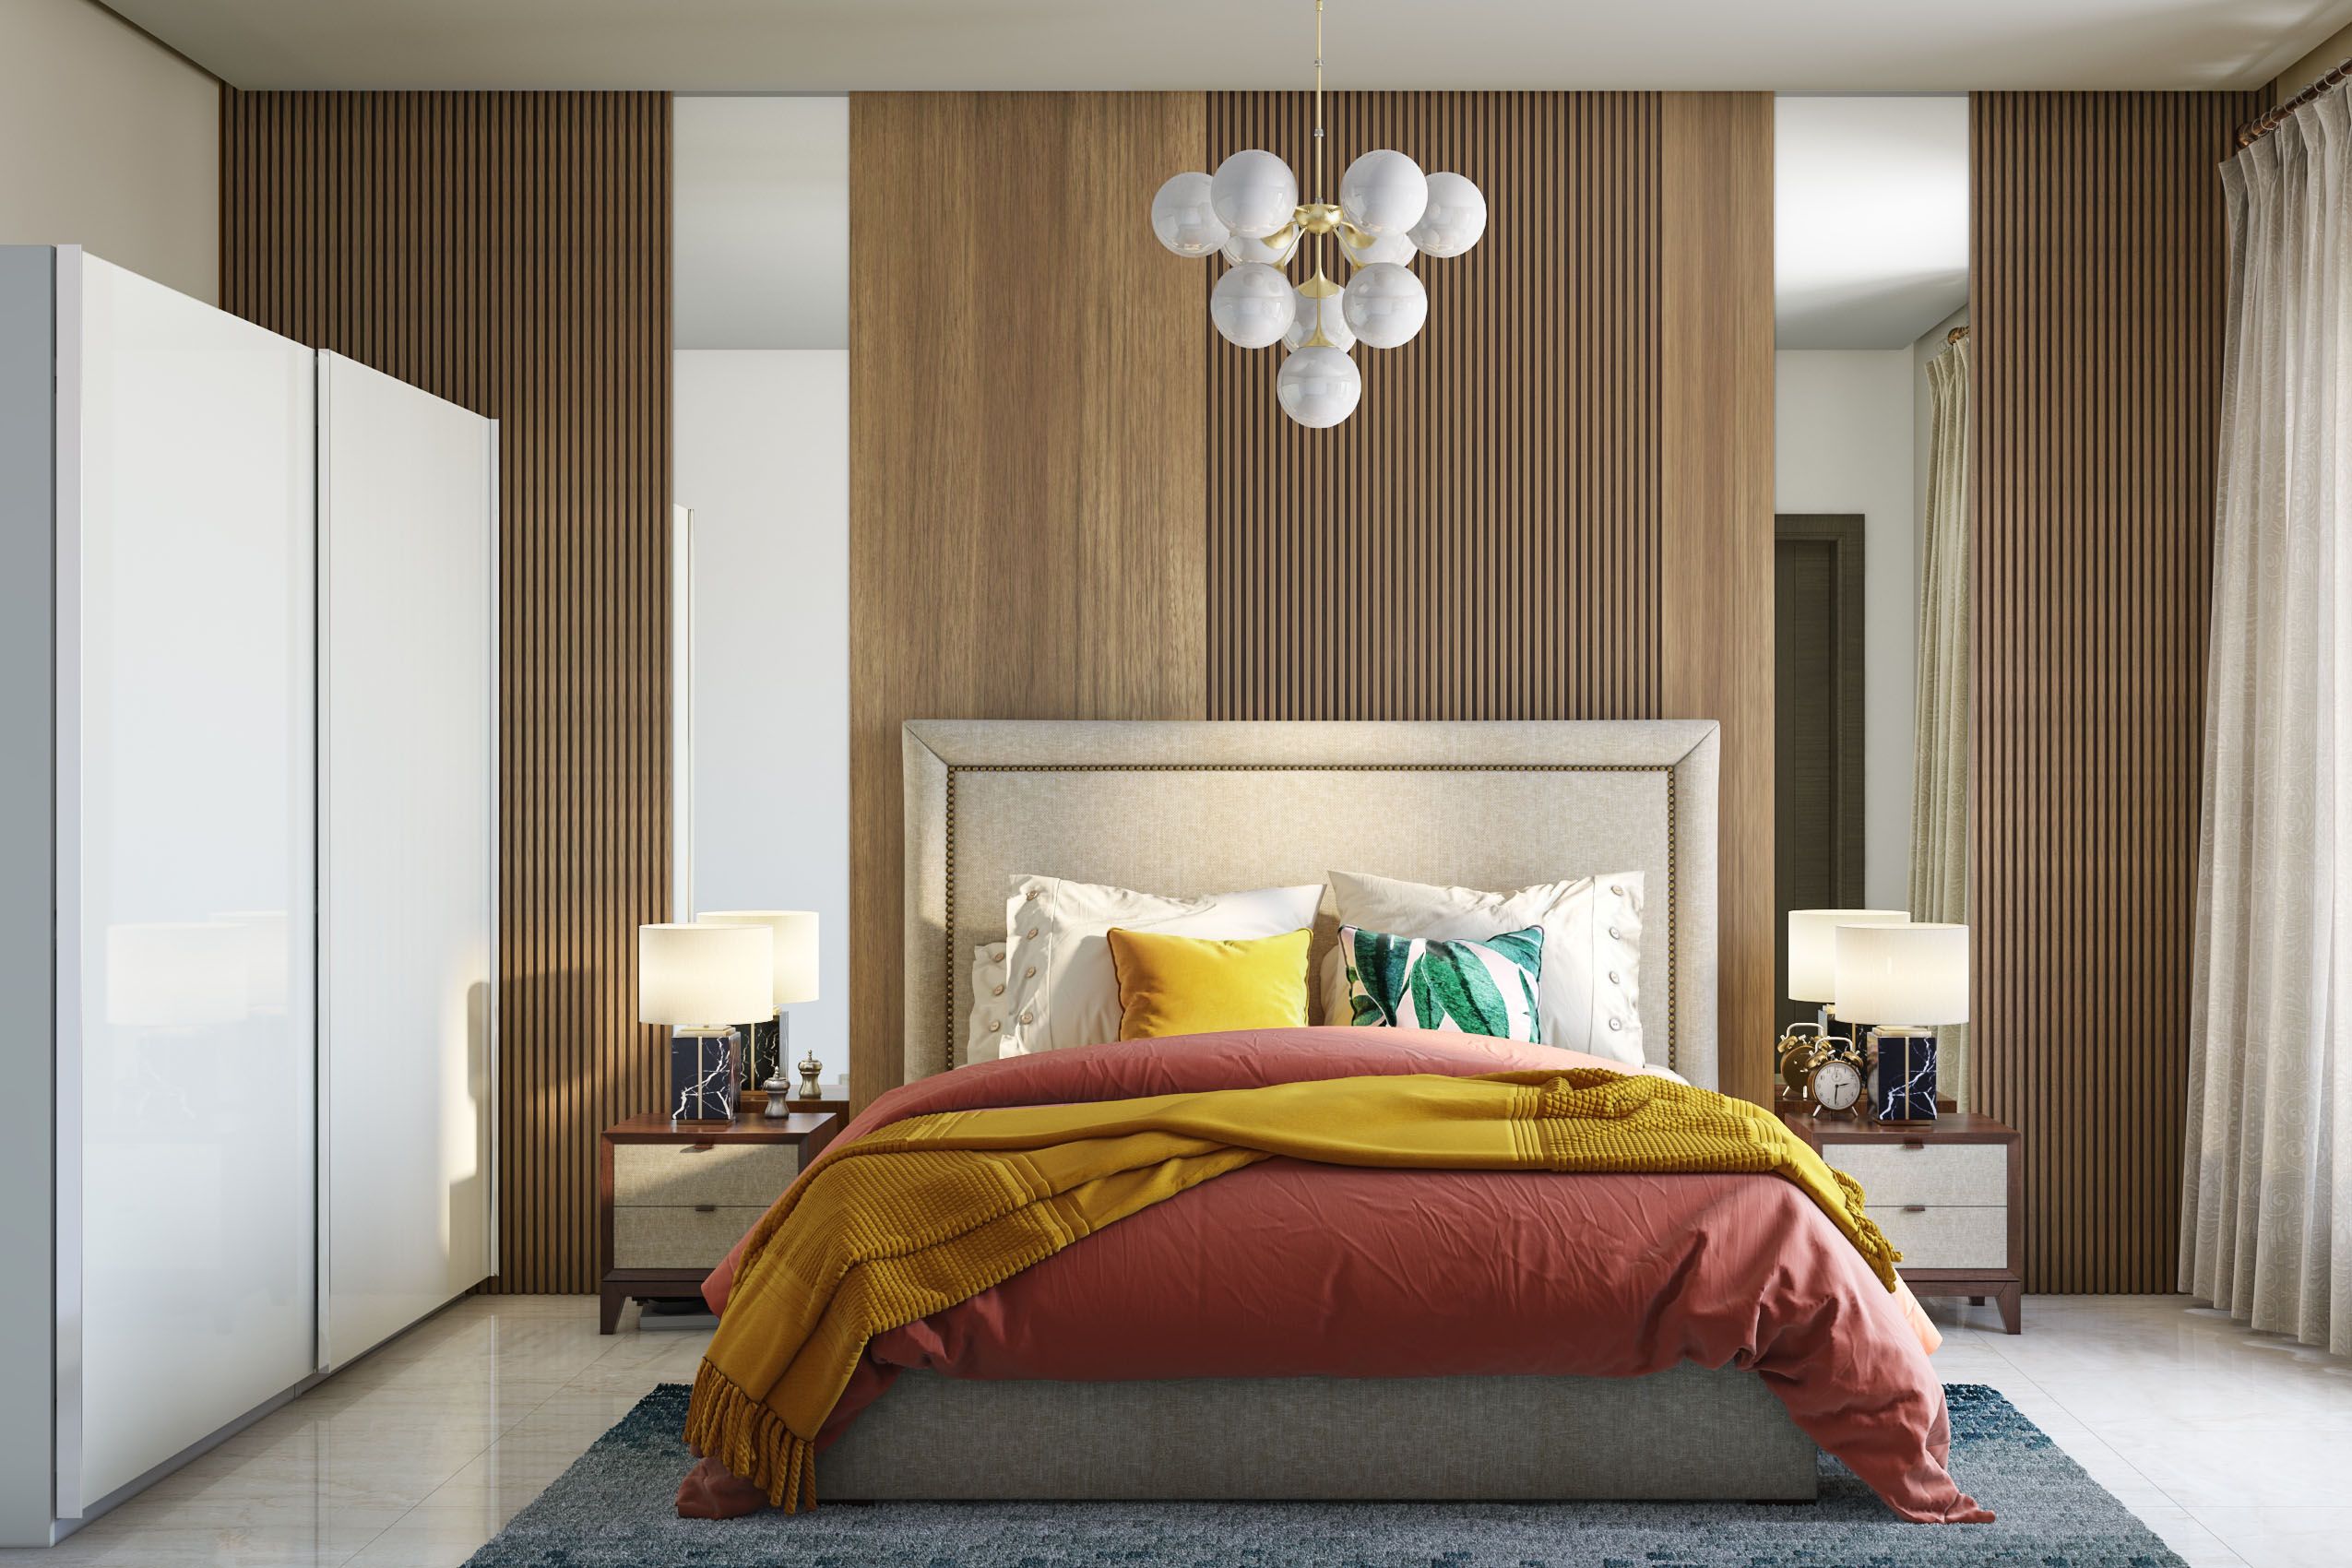 Modern Wooden Fluted Bedroom Wall Design With Mirrors